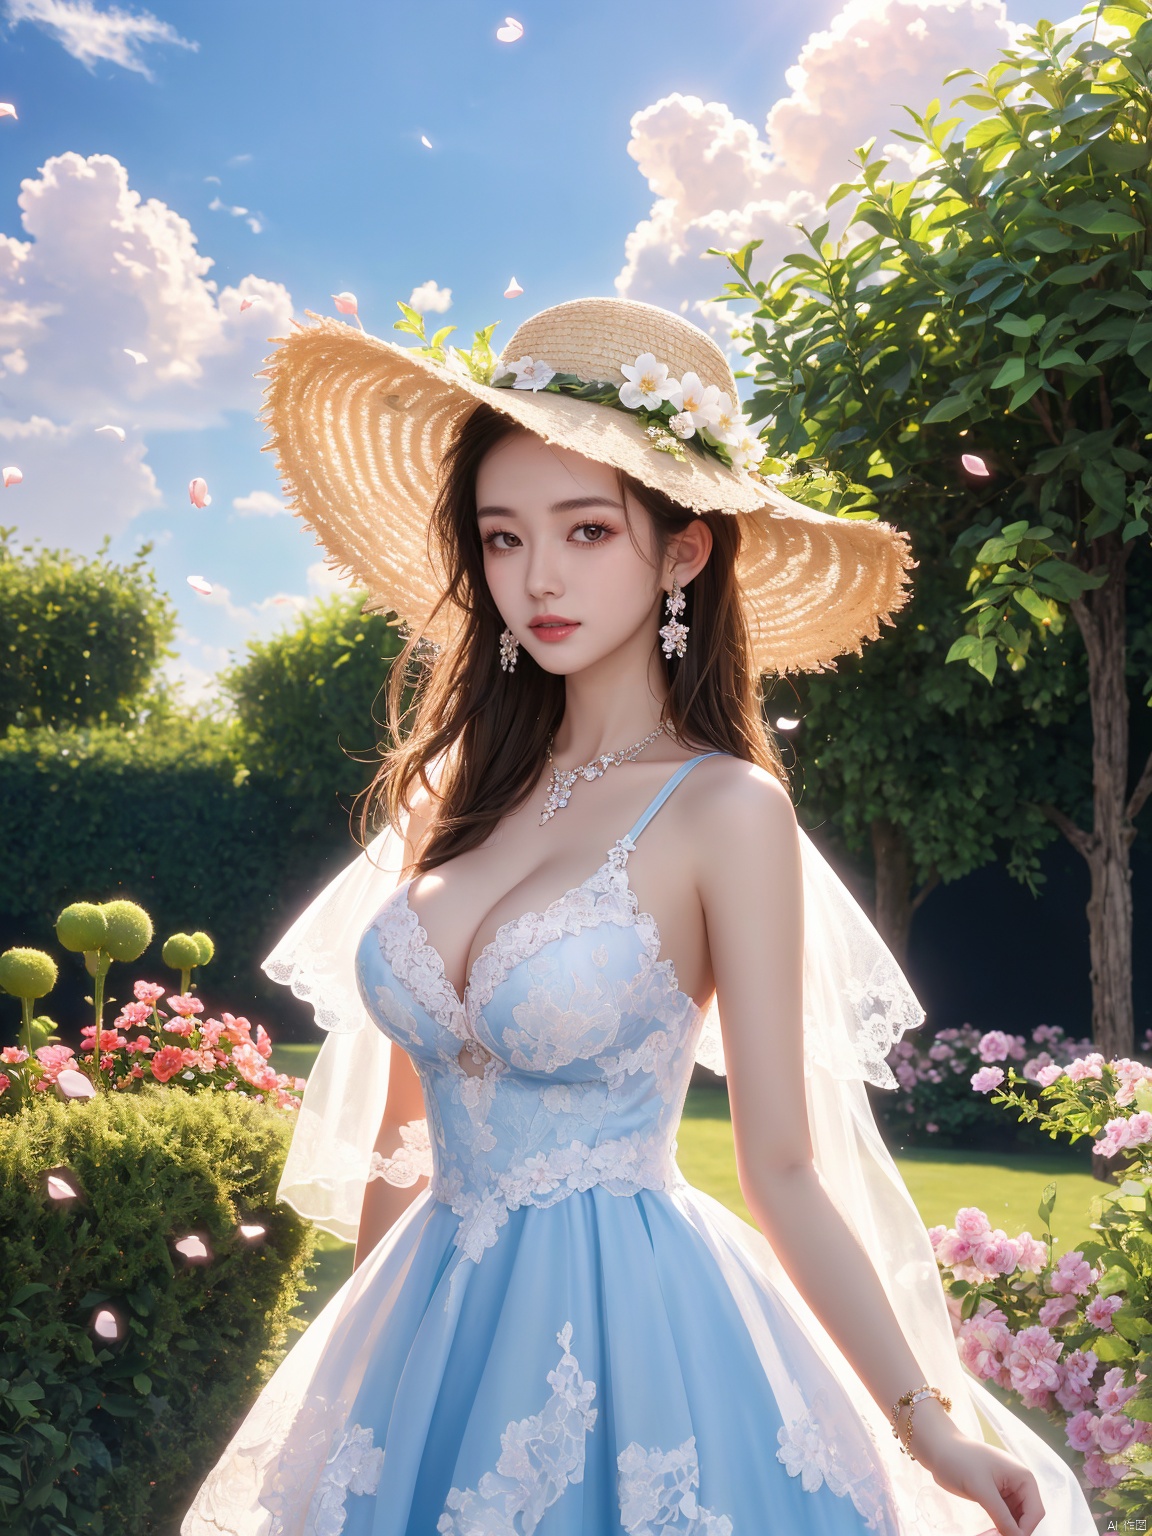  masterpiece, 1 girl, 18 years old, Look at me, long_hair, straw_hat, Wreath, petals, Big breasts, Light blue sky, Clouds, hat_flower, jewelry, Stand, outdoors, Garden, falling_petals, White dress, textured skin, super detail, best quality, HUBG_Rococo_Style(loanword)